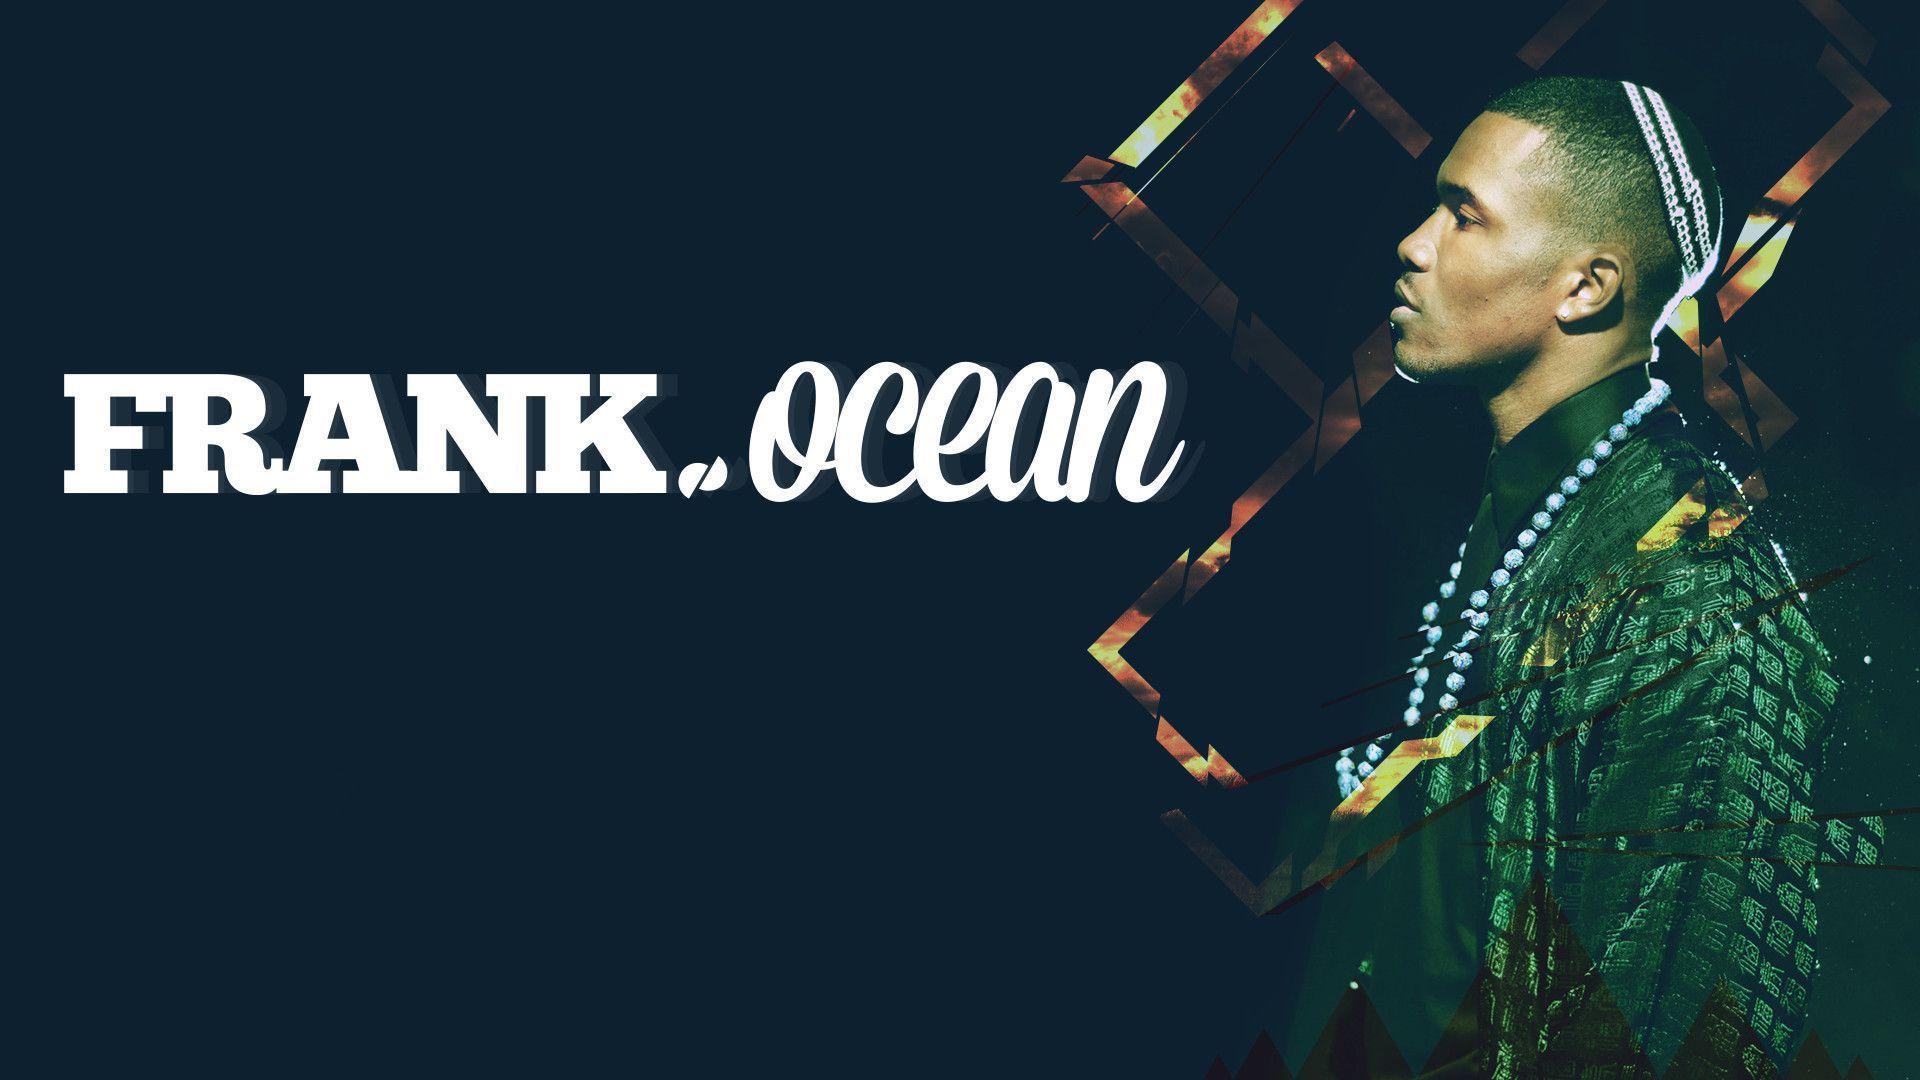 Frank Ocean Wallpapers Image Photos Pictures Backgrounds